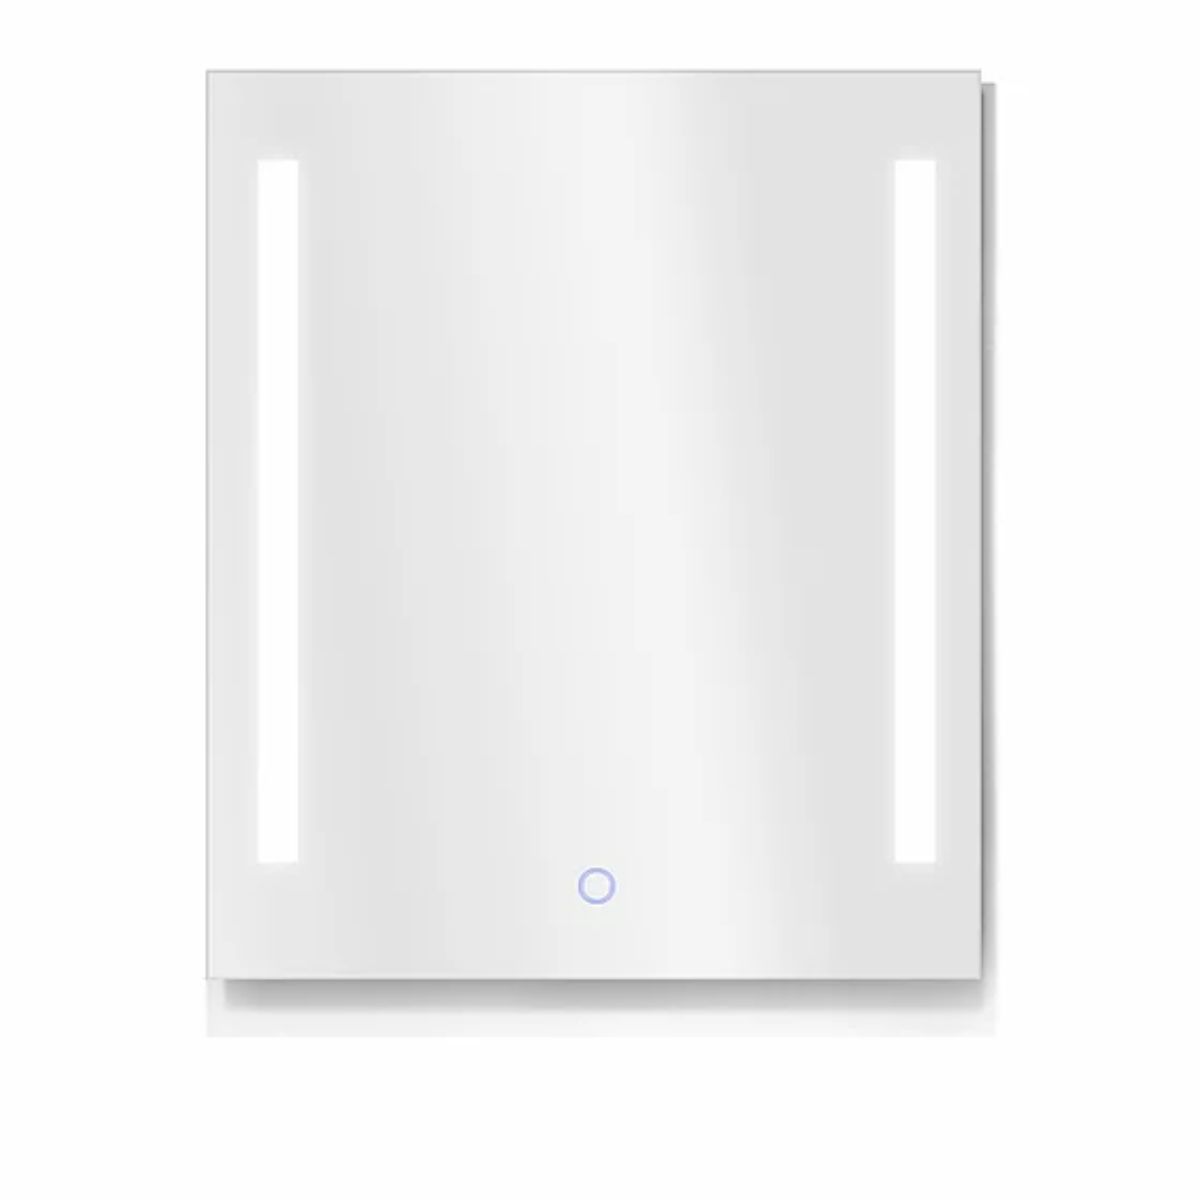 Catella 30 in. x 36 in. LED Wall Mirror with Touch On/Off Dimmer Function